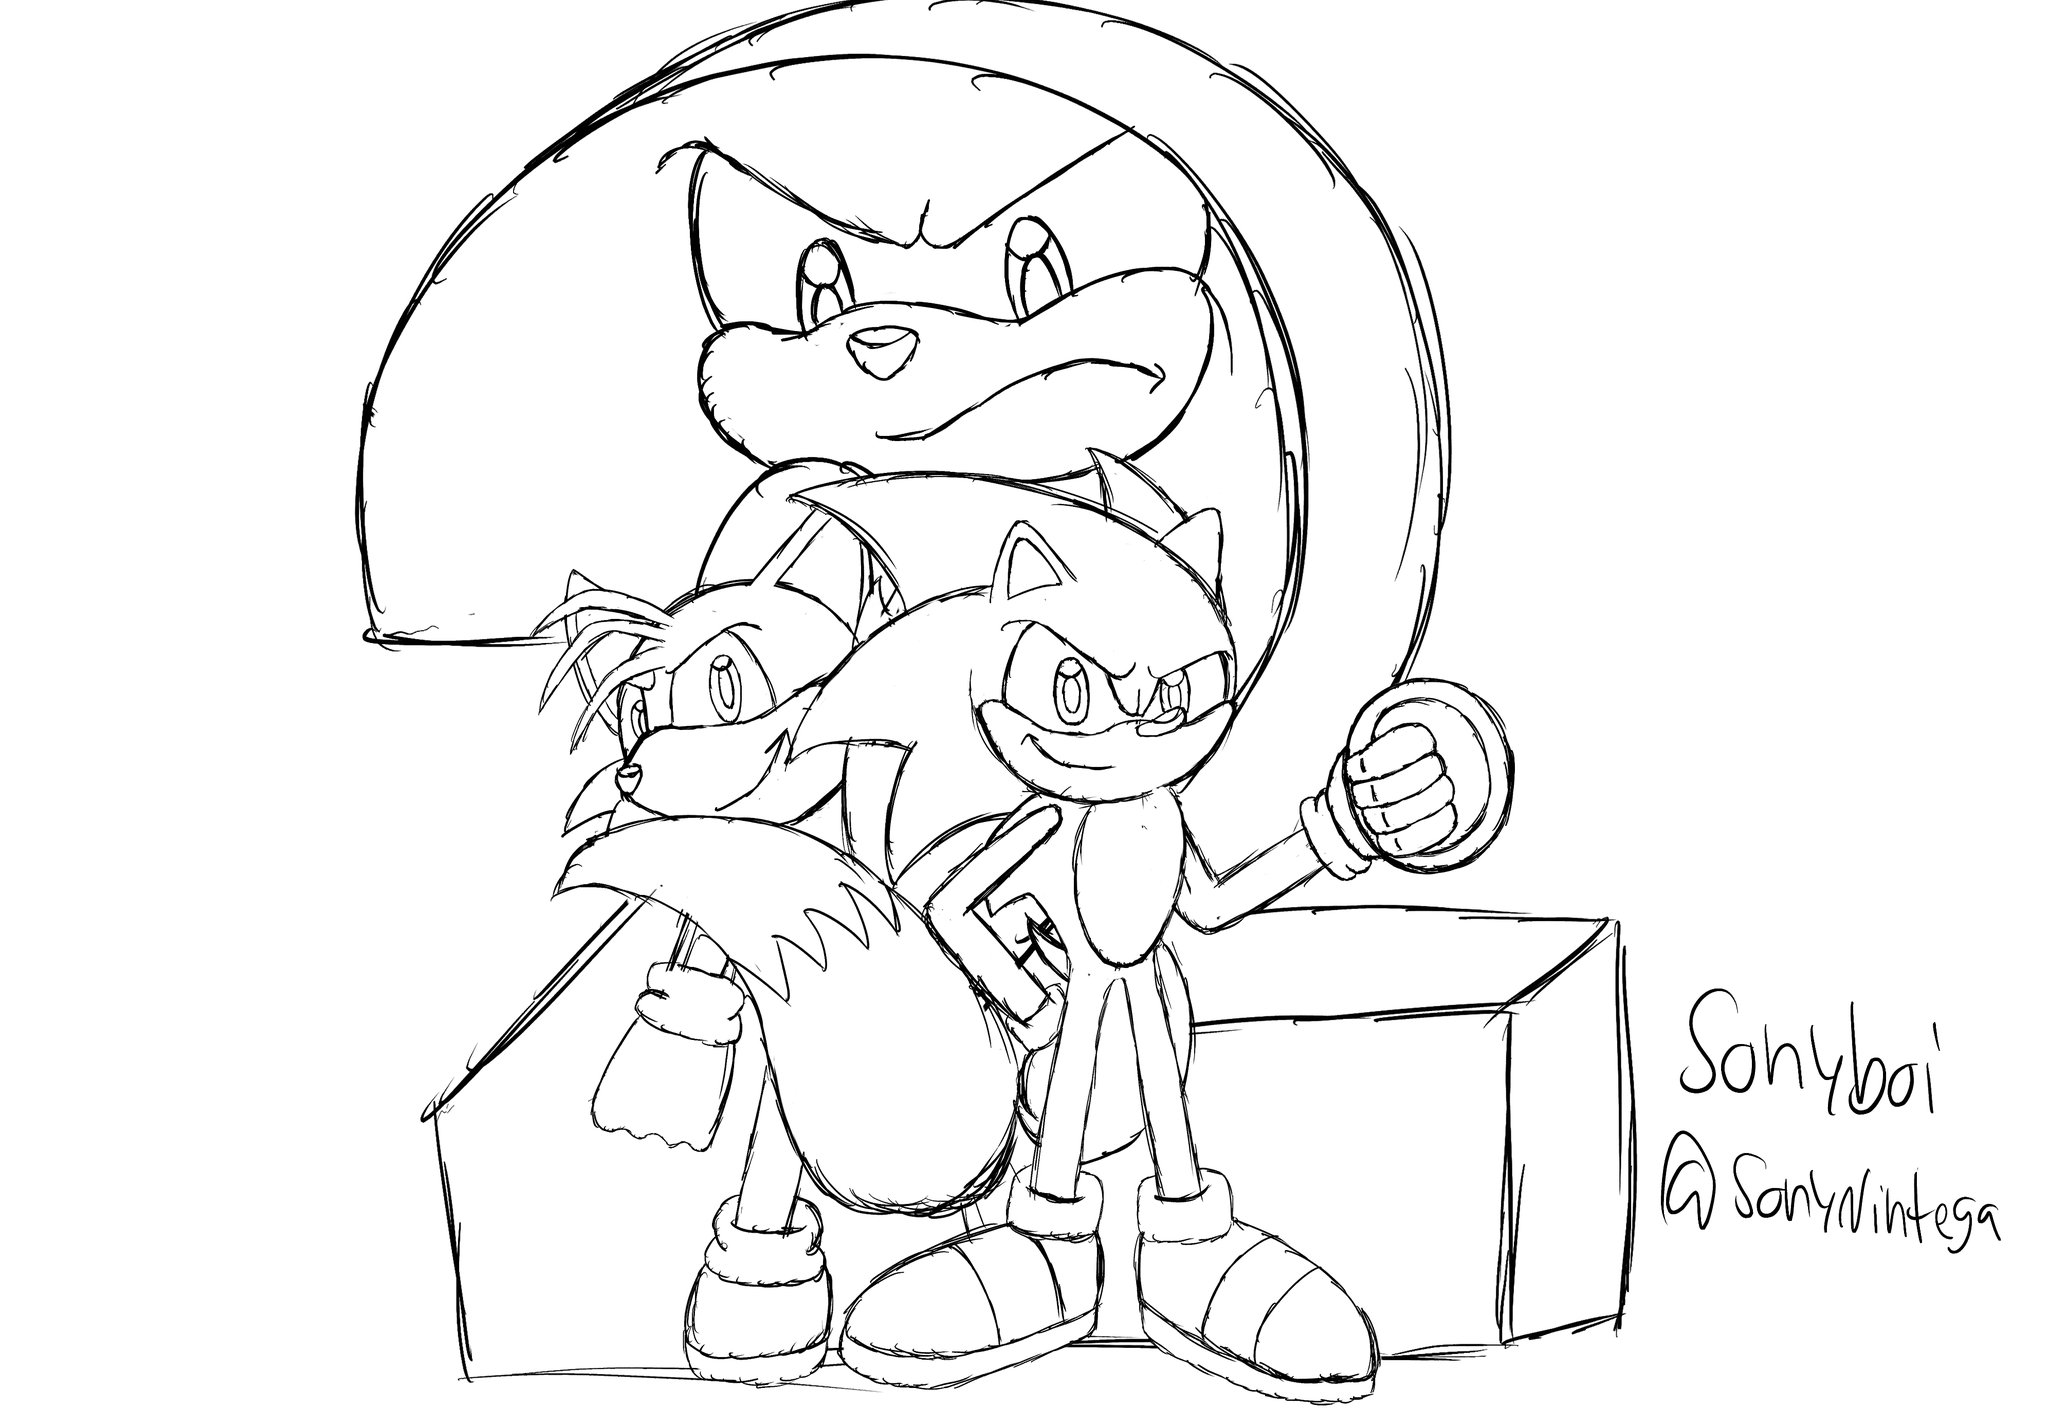 Sonyboi missions are open on x quick sonic movie drawing cause i was bored enjoysonicthehedgehog sonicmovie sonic tails knuckles httpstcoejxuphngdf x